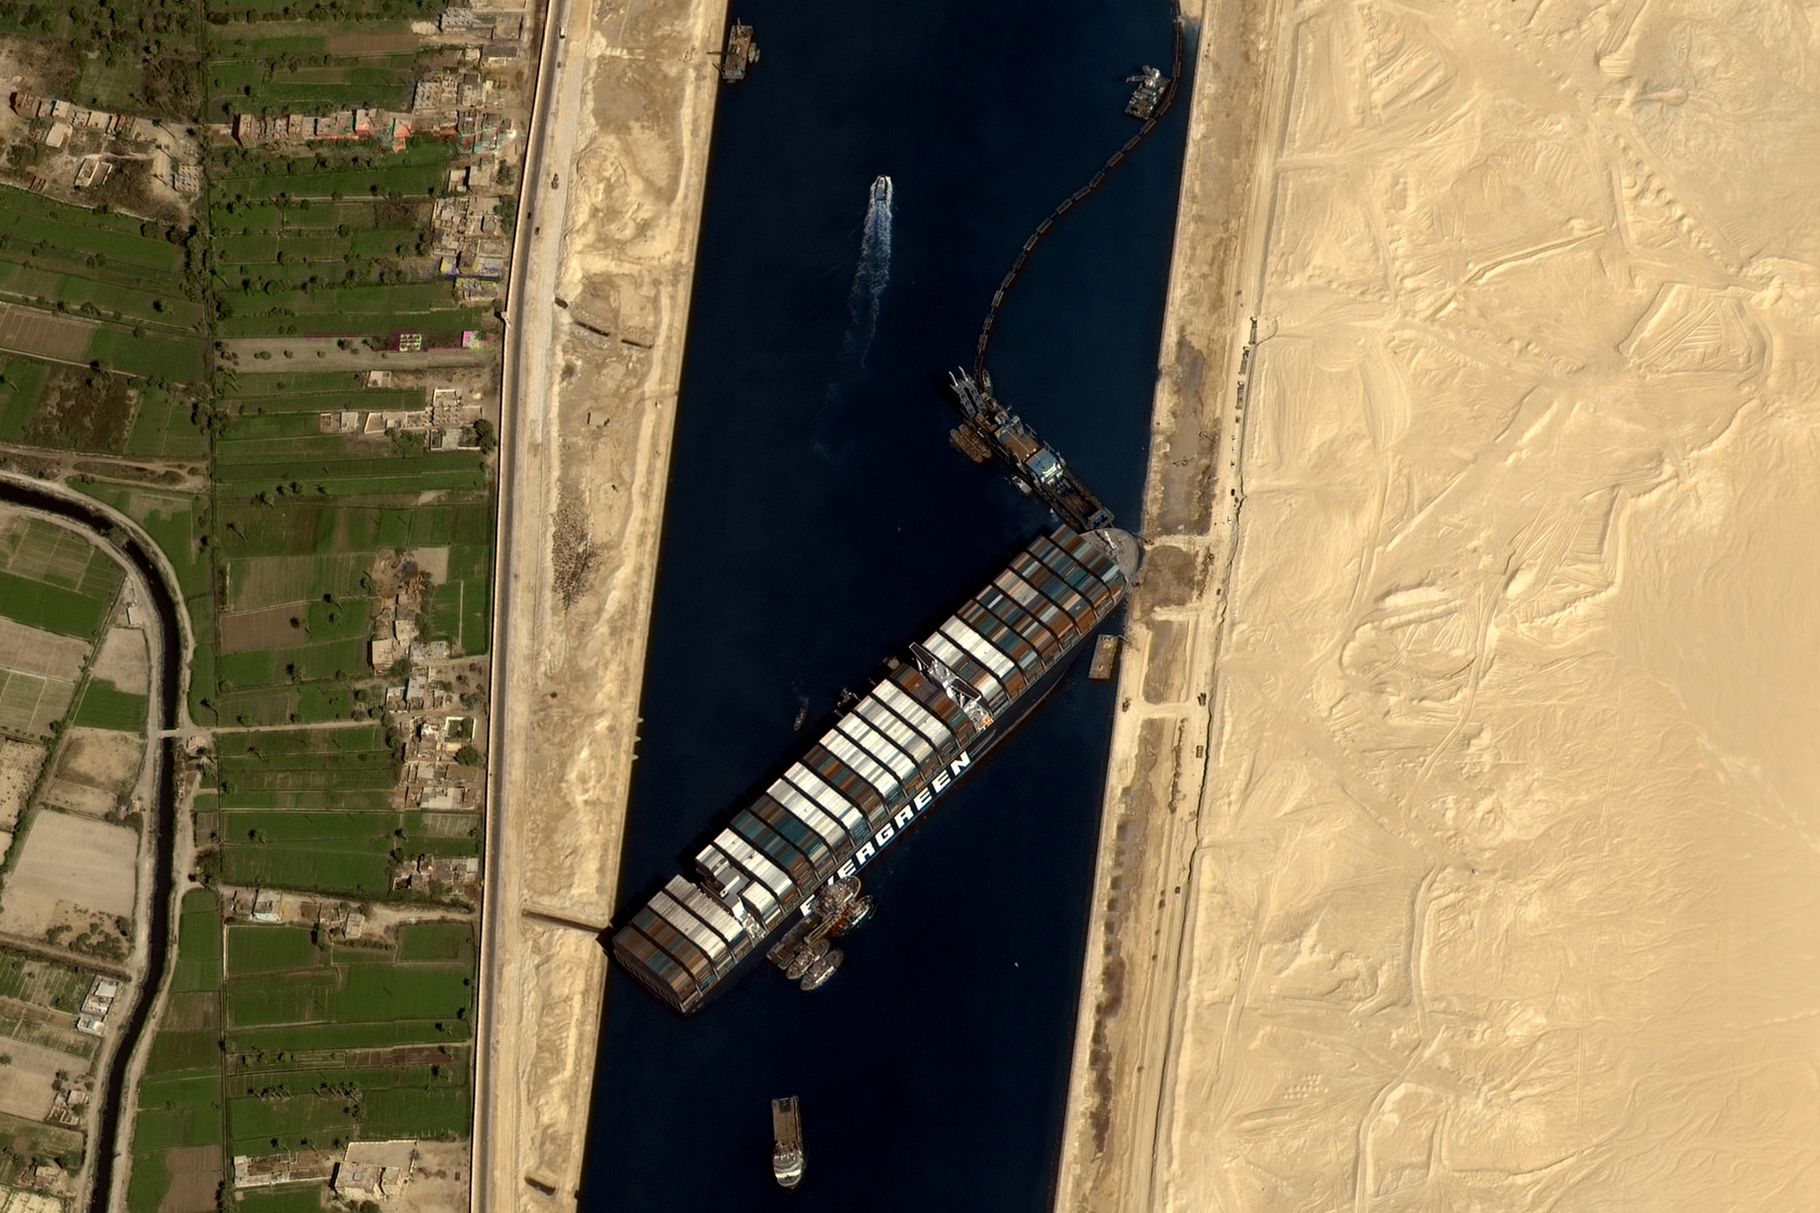 Microsoft Flight Simulator: How to Install Latest mod featuring the cargo ship stuck in the Suez Canal